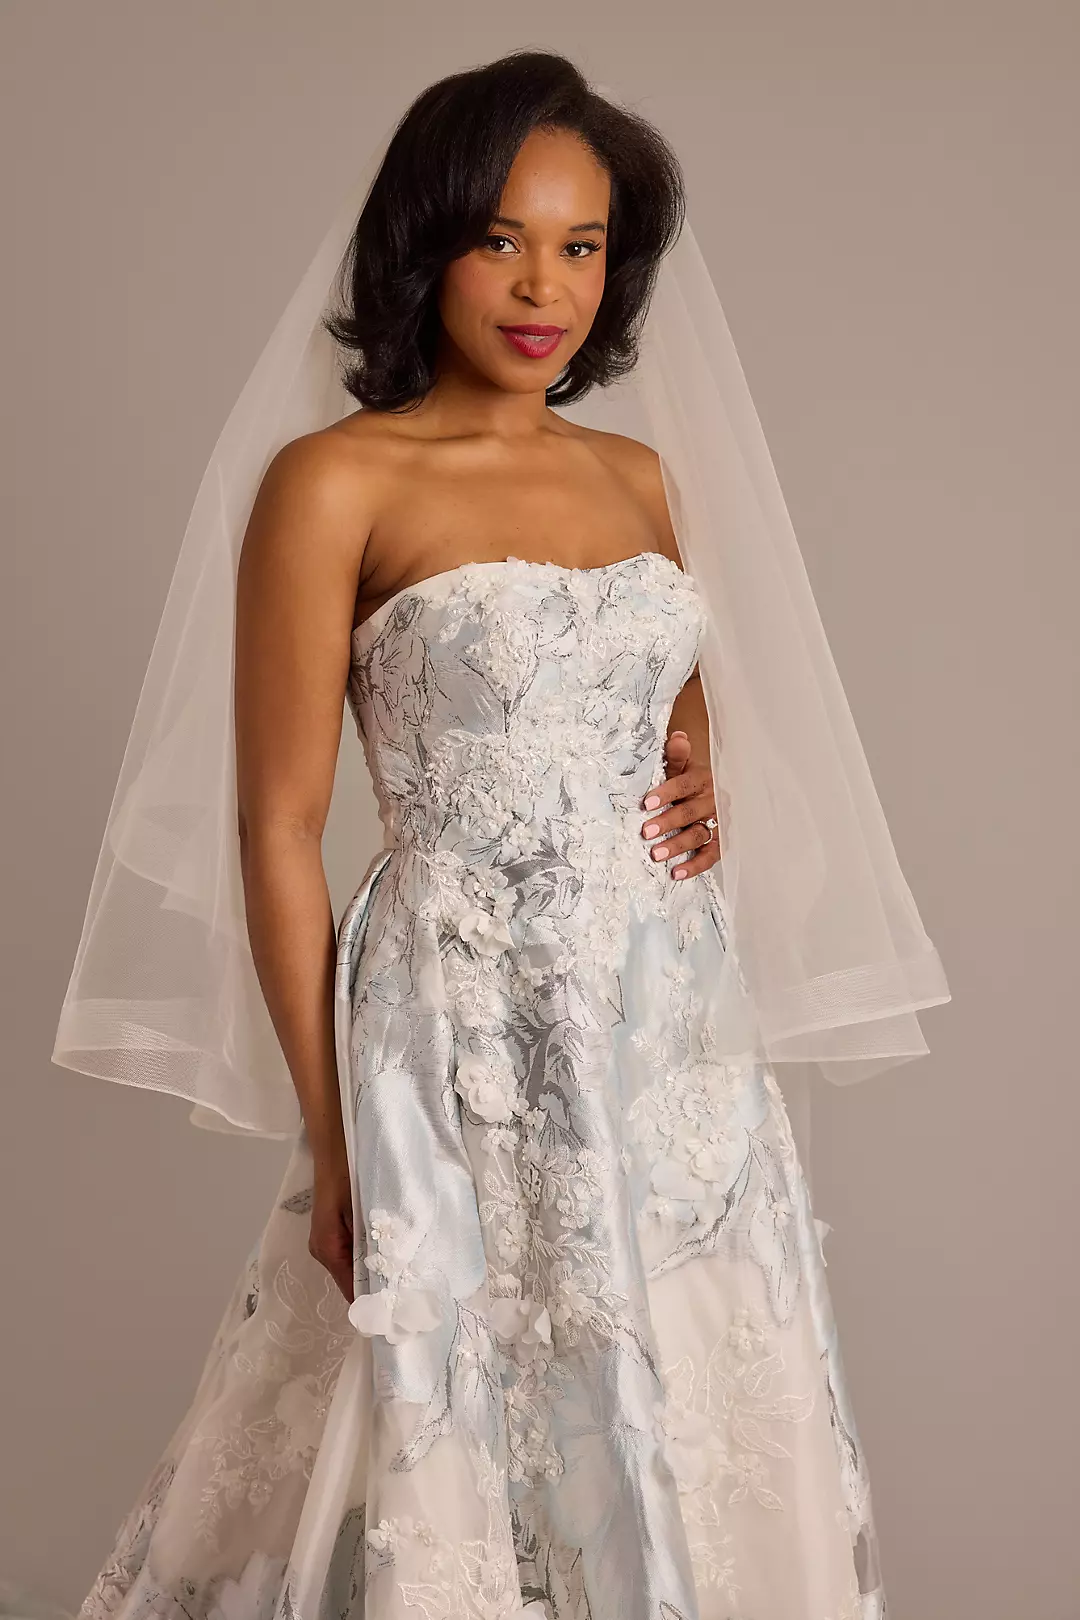 Two Tier Walking Length Veil with Horsehair Trim Image